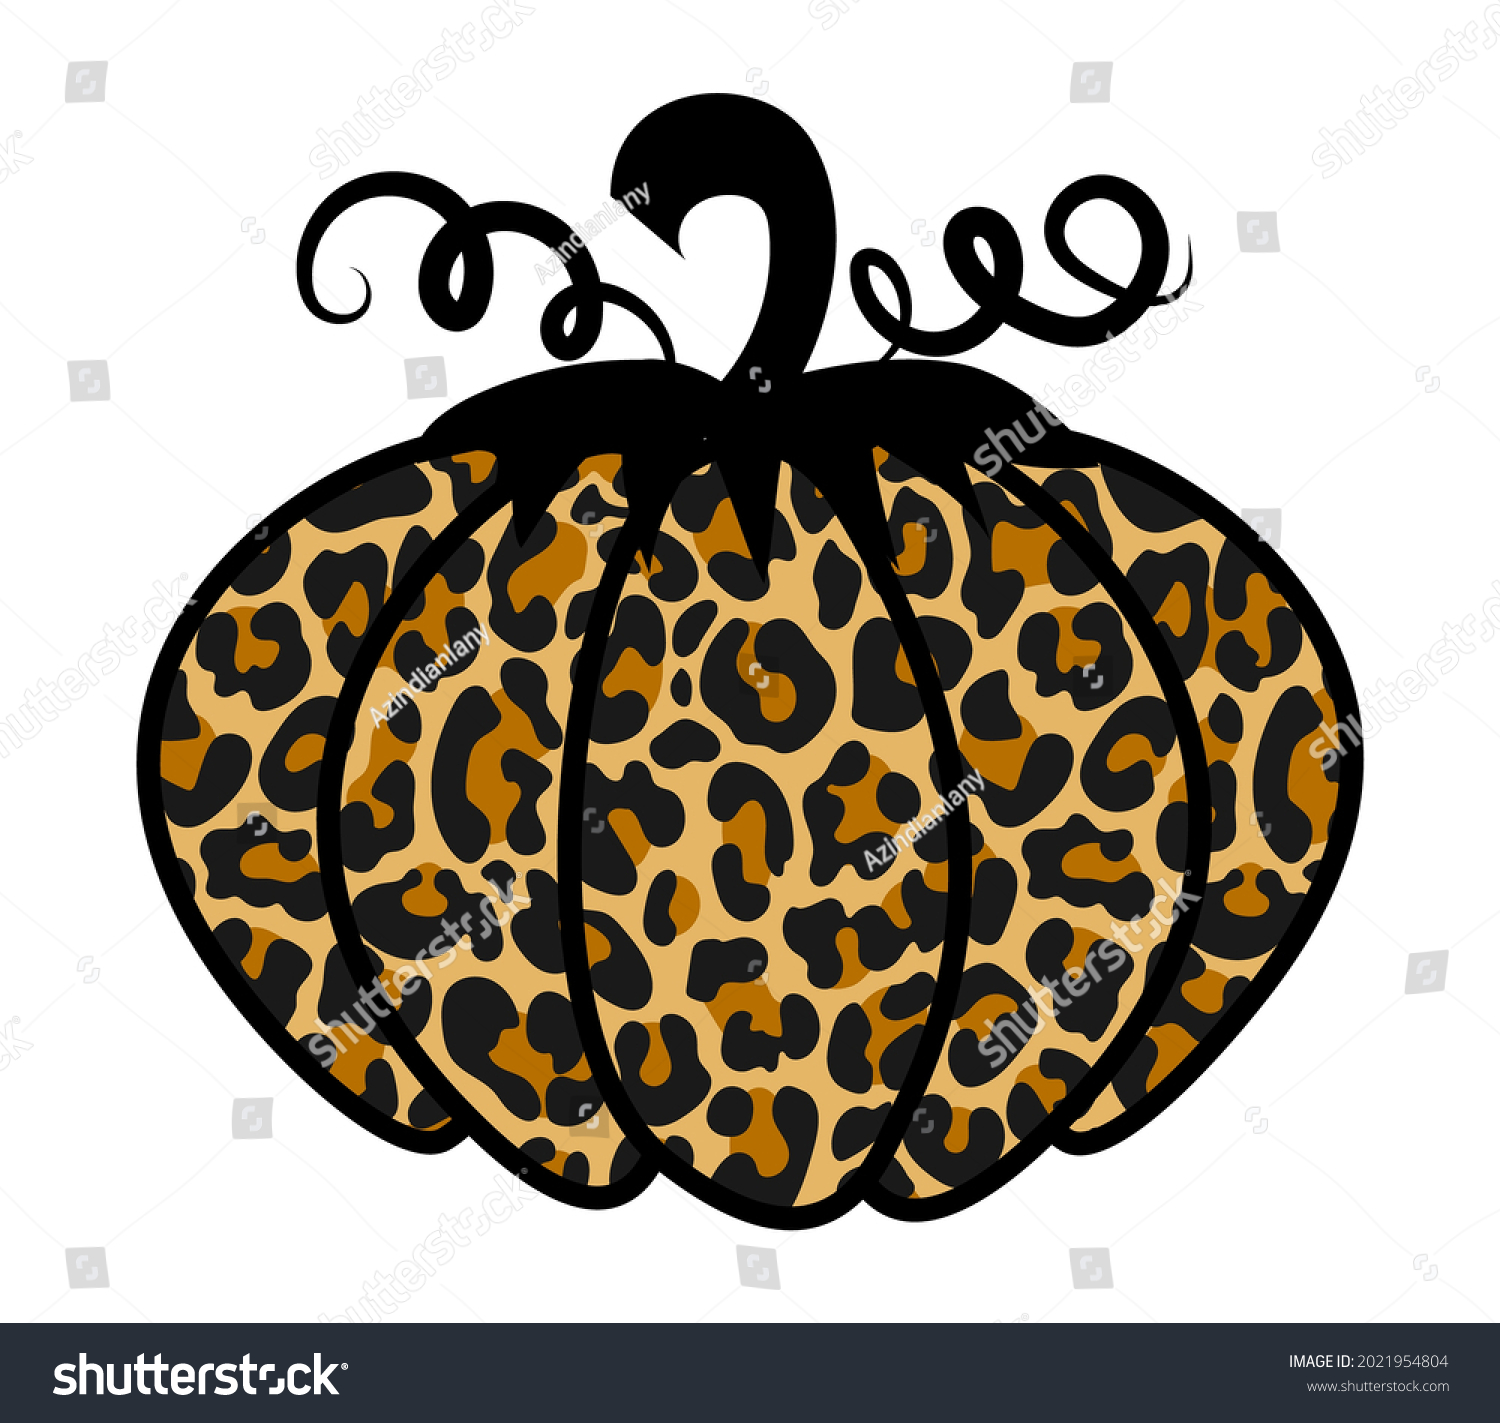 SVG of Leopard pumpkin - Hand drawn vector illustration. Autumn color poster. Good for Thanksgiving or Halloween decoration, posters, greeting cards, banners, textiles, gifts, shirts, mugs or other gifts. svg